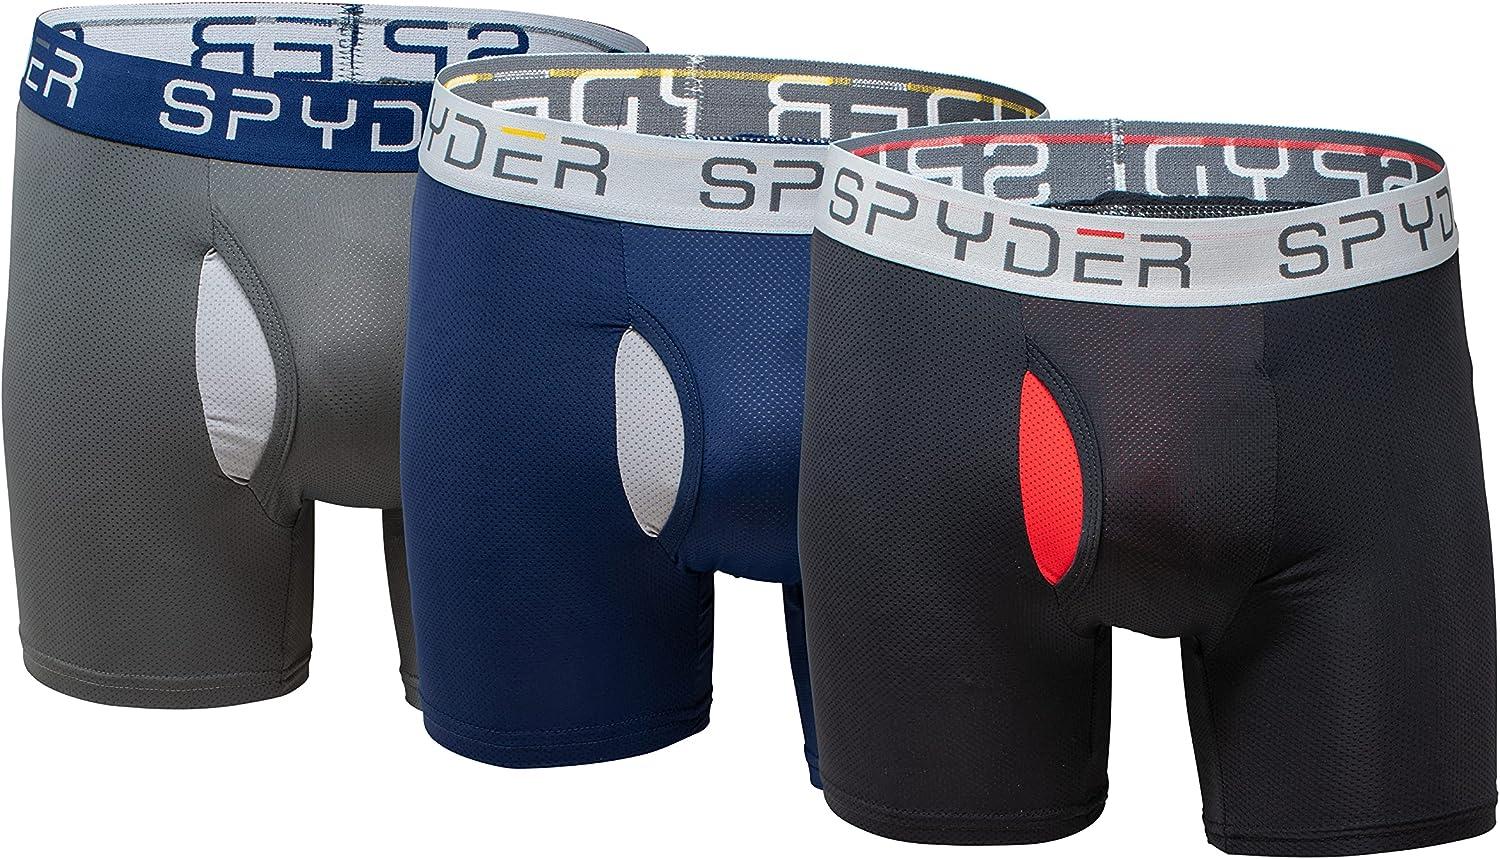  Spyder Men's Performance Boxer Briefs Sports Underwear 3 Pack  (Small, Black) : Clothing, Shoes & Jewelry